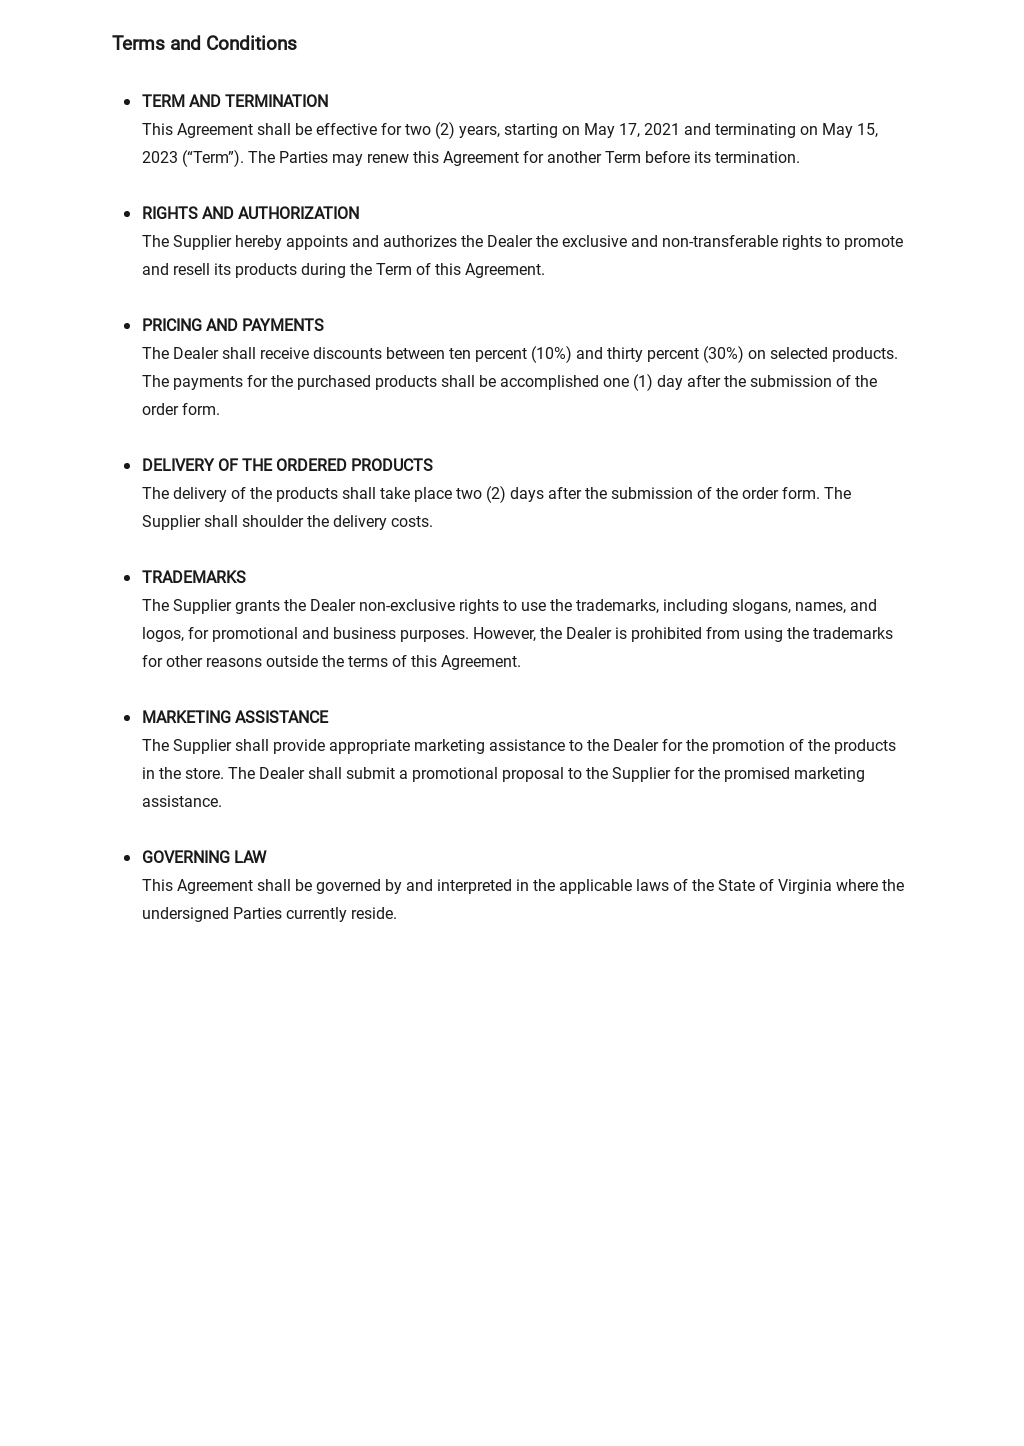 Dealership Agreement Template - Google Docs, Word, Apple Pages For net 30 terms agreement template